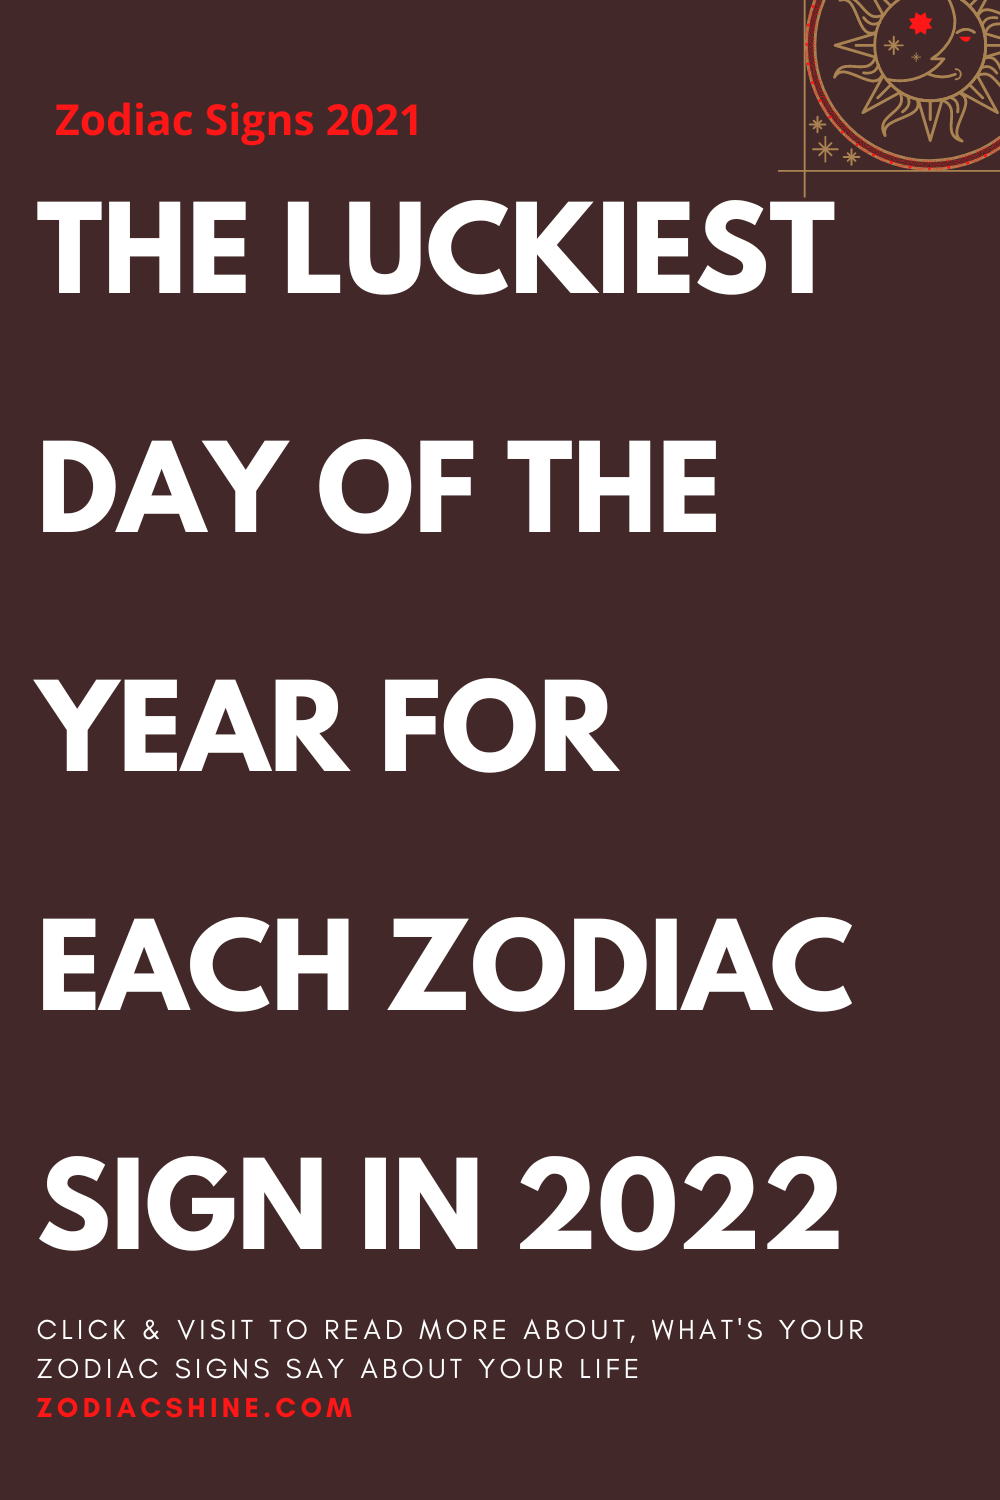 THE LUCKIEST DAY OF THE YEAR FOR EACH ZODIAC SIGN IN 2022